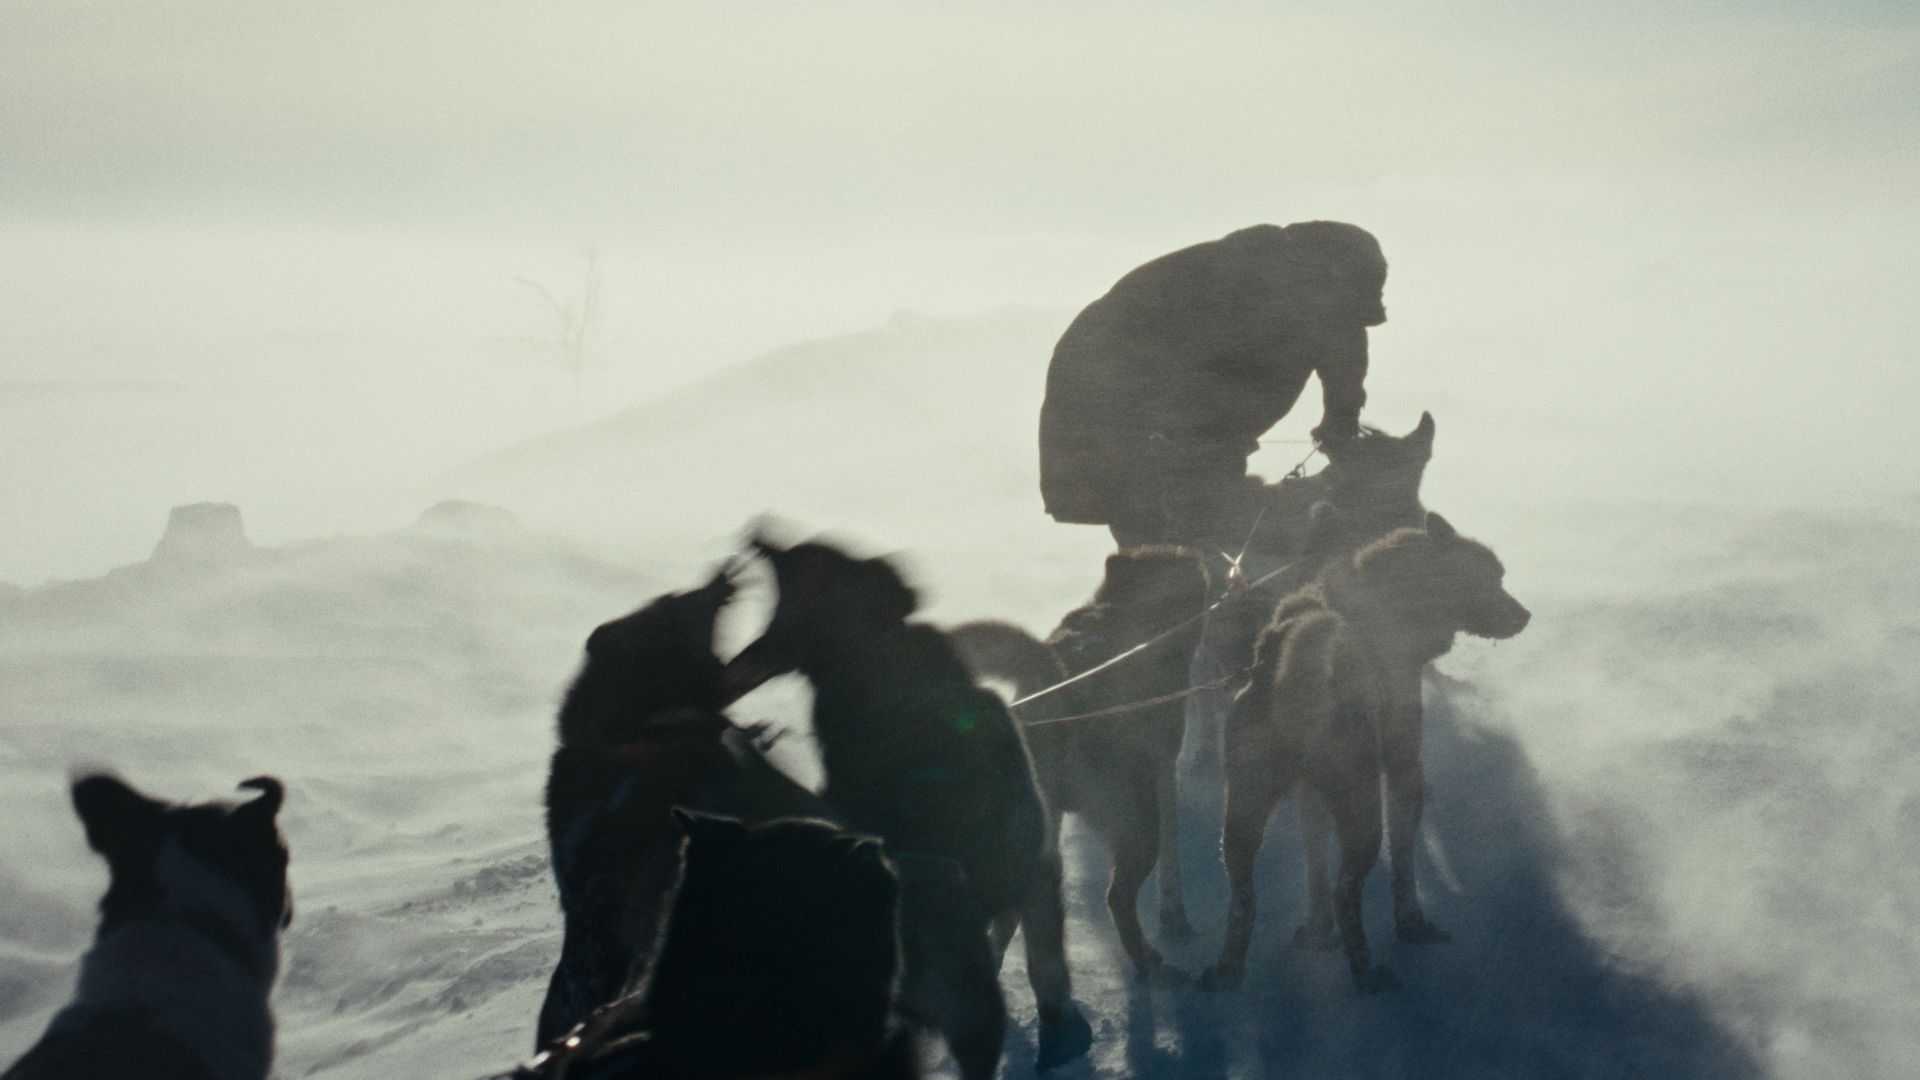 A musher tends to his sled dogs in a snowstorm